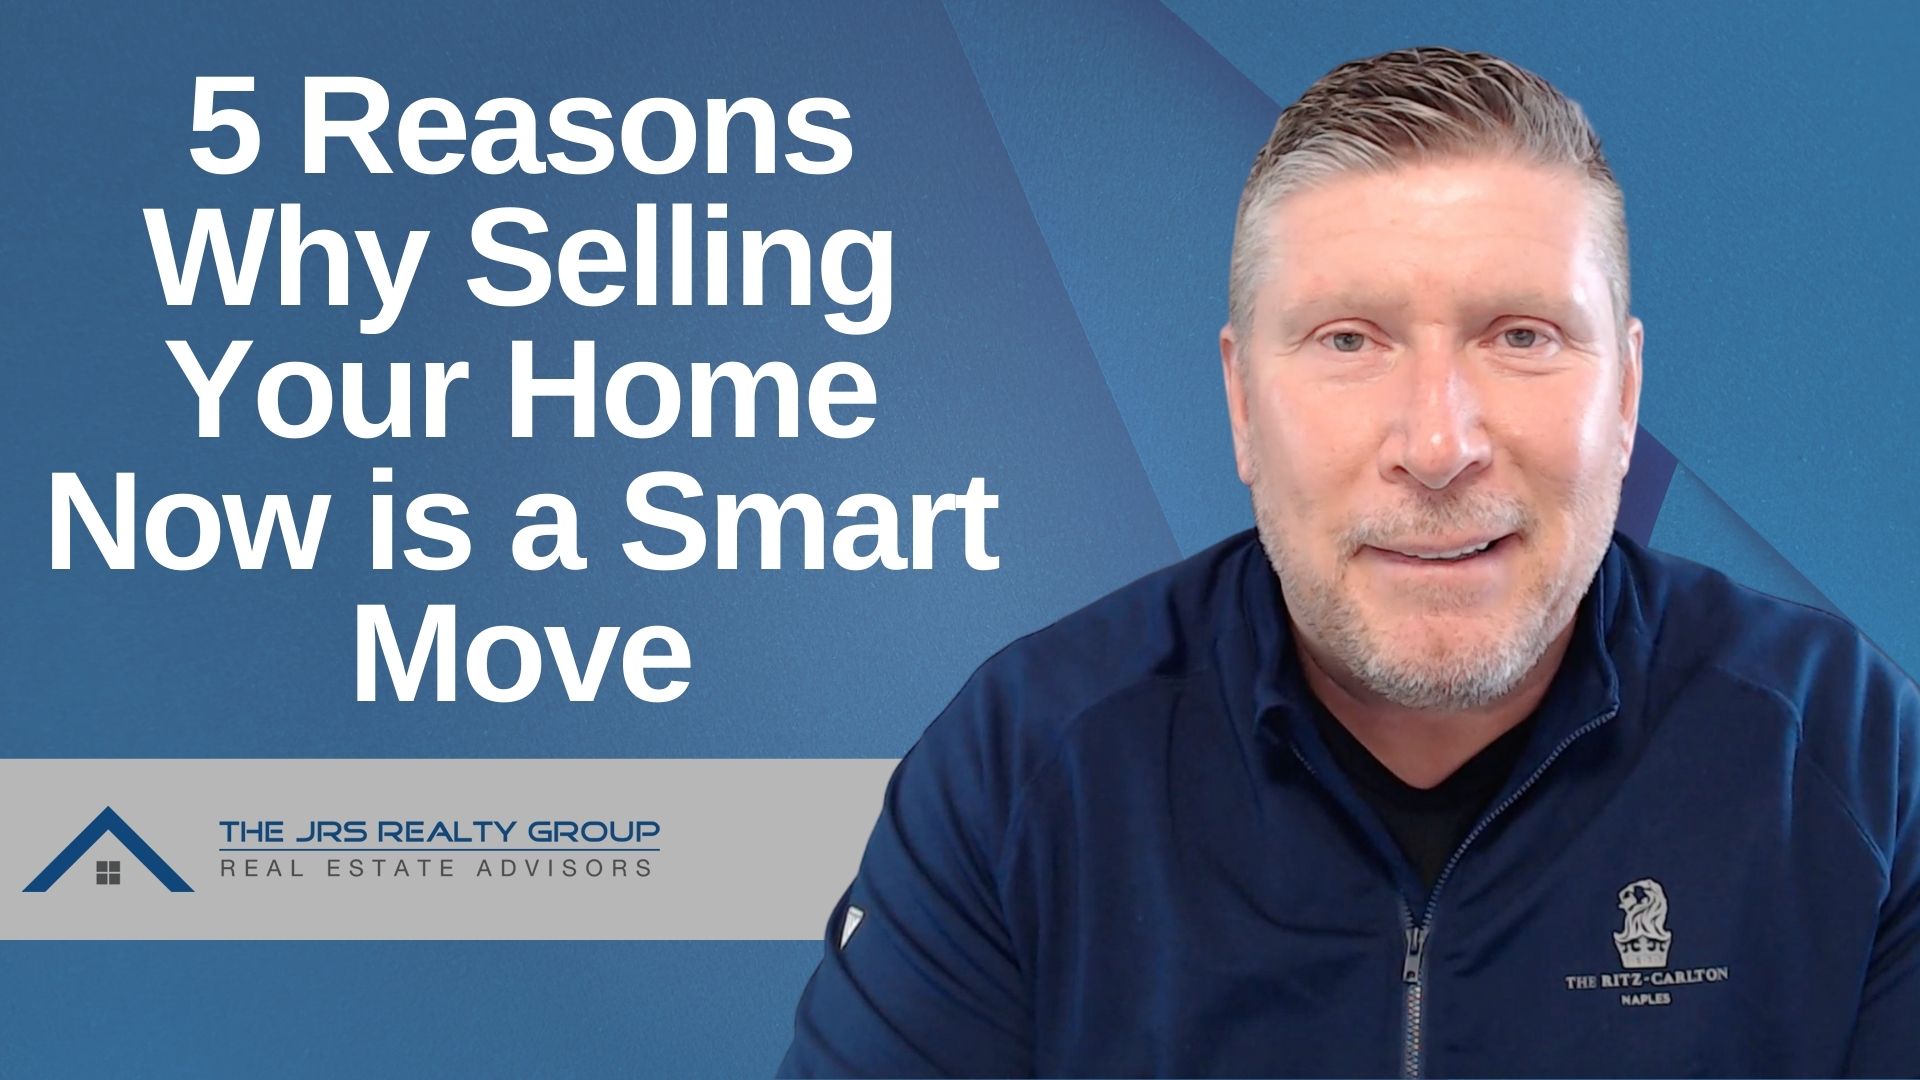 Ready To Sell Your Home? Here Are 5 Reasons To Do It Now